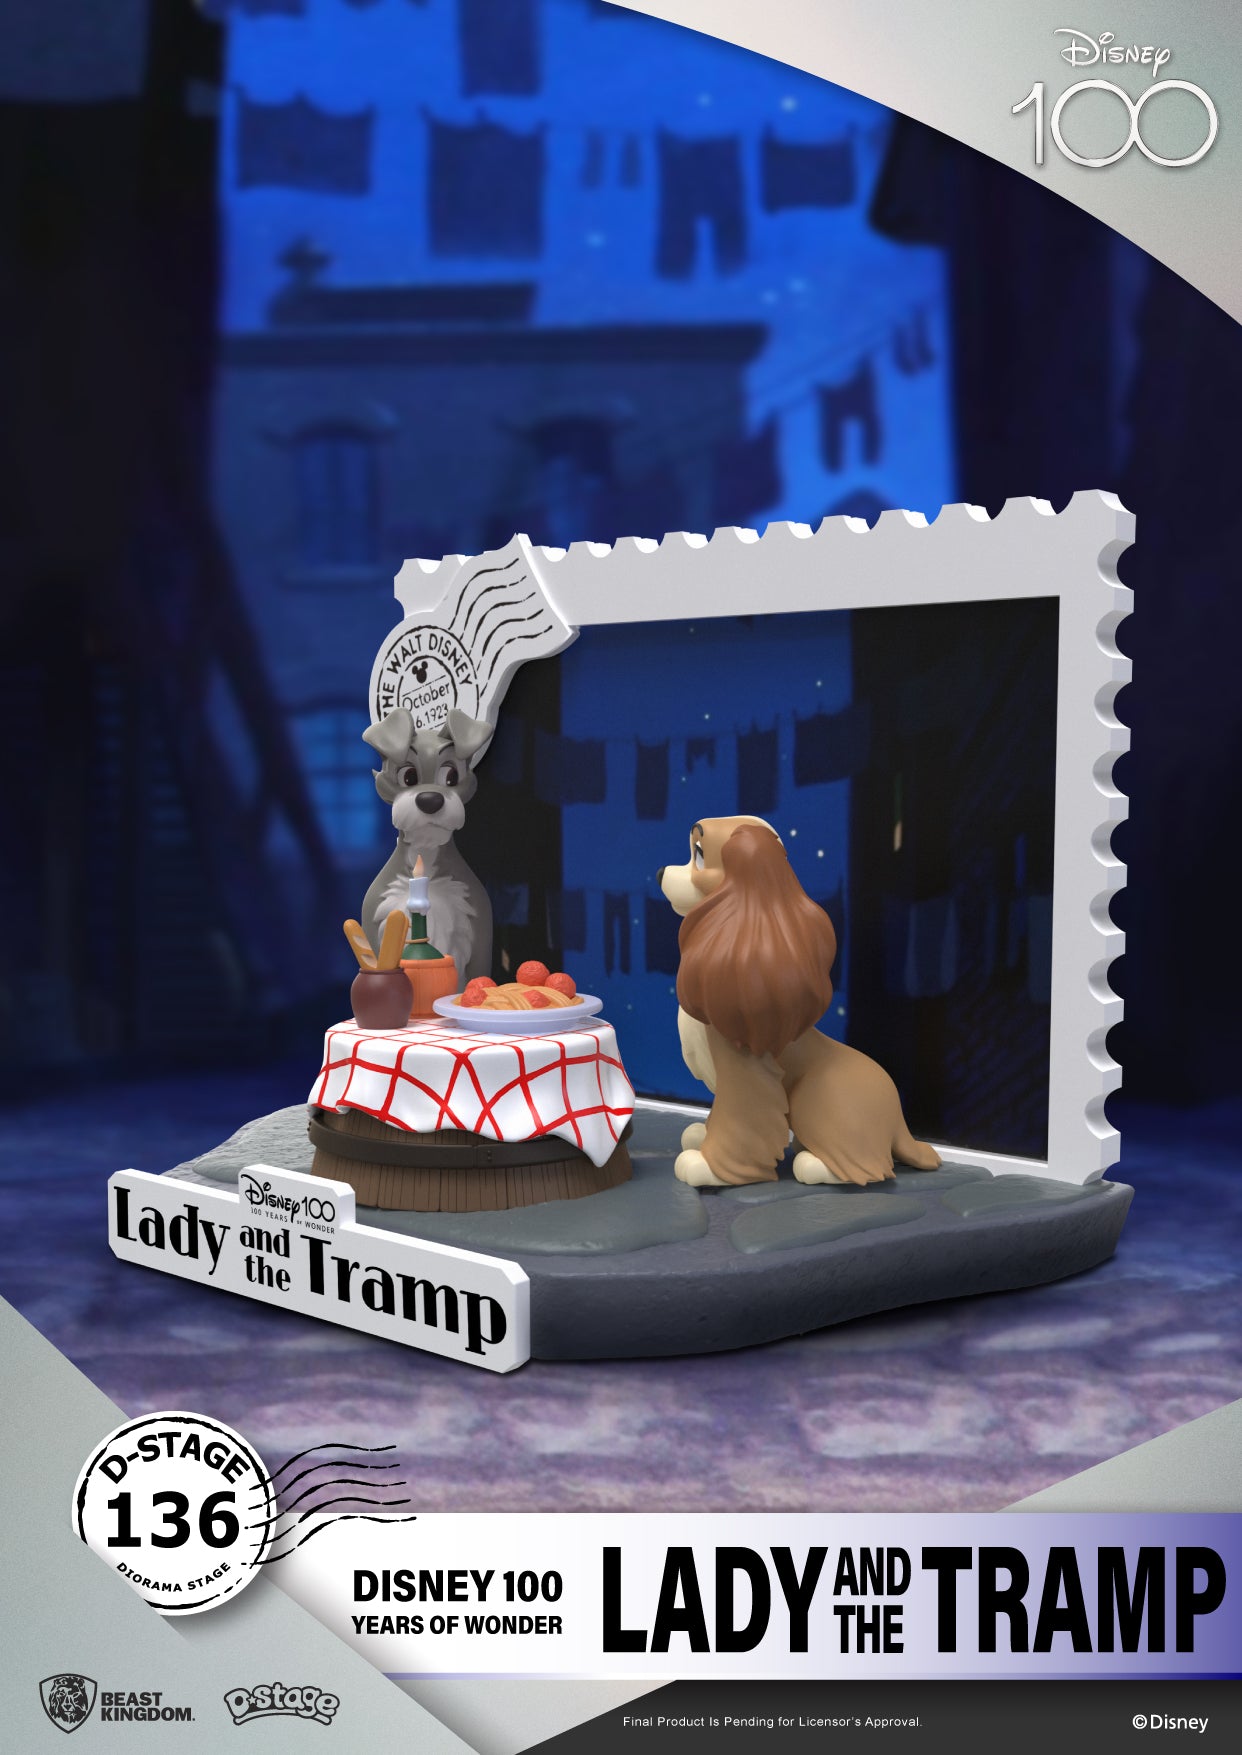 Beast Kingdom DS-136 Disney 100 Years of Wonder-Lady And The Tramp Diorama Stage D-Stage Figure Statue